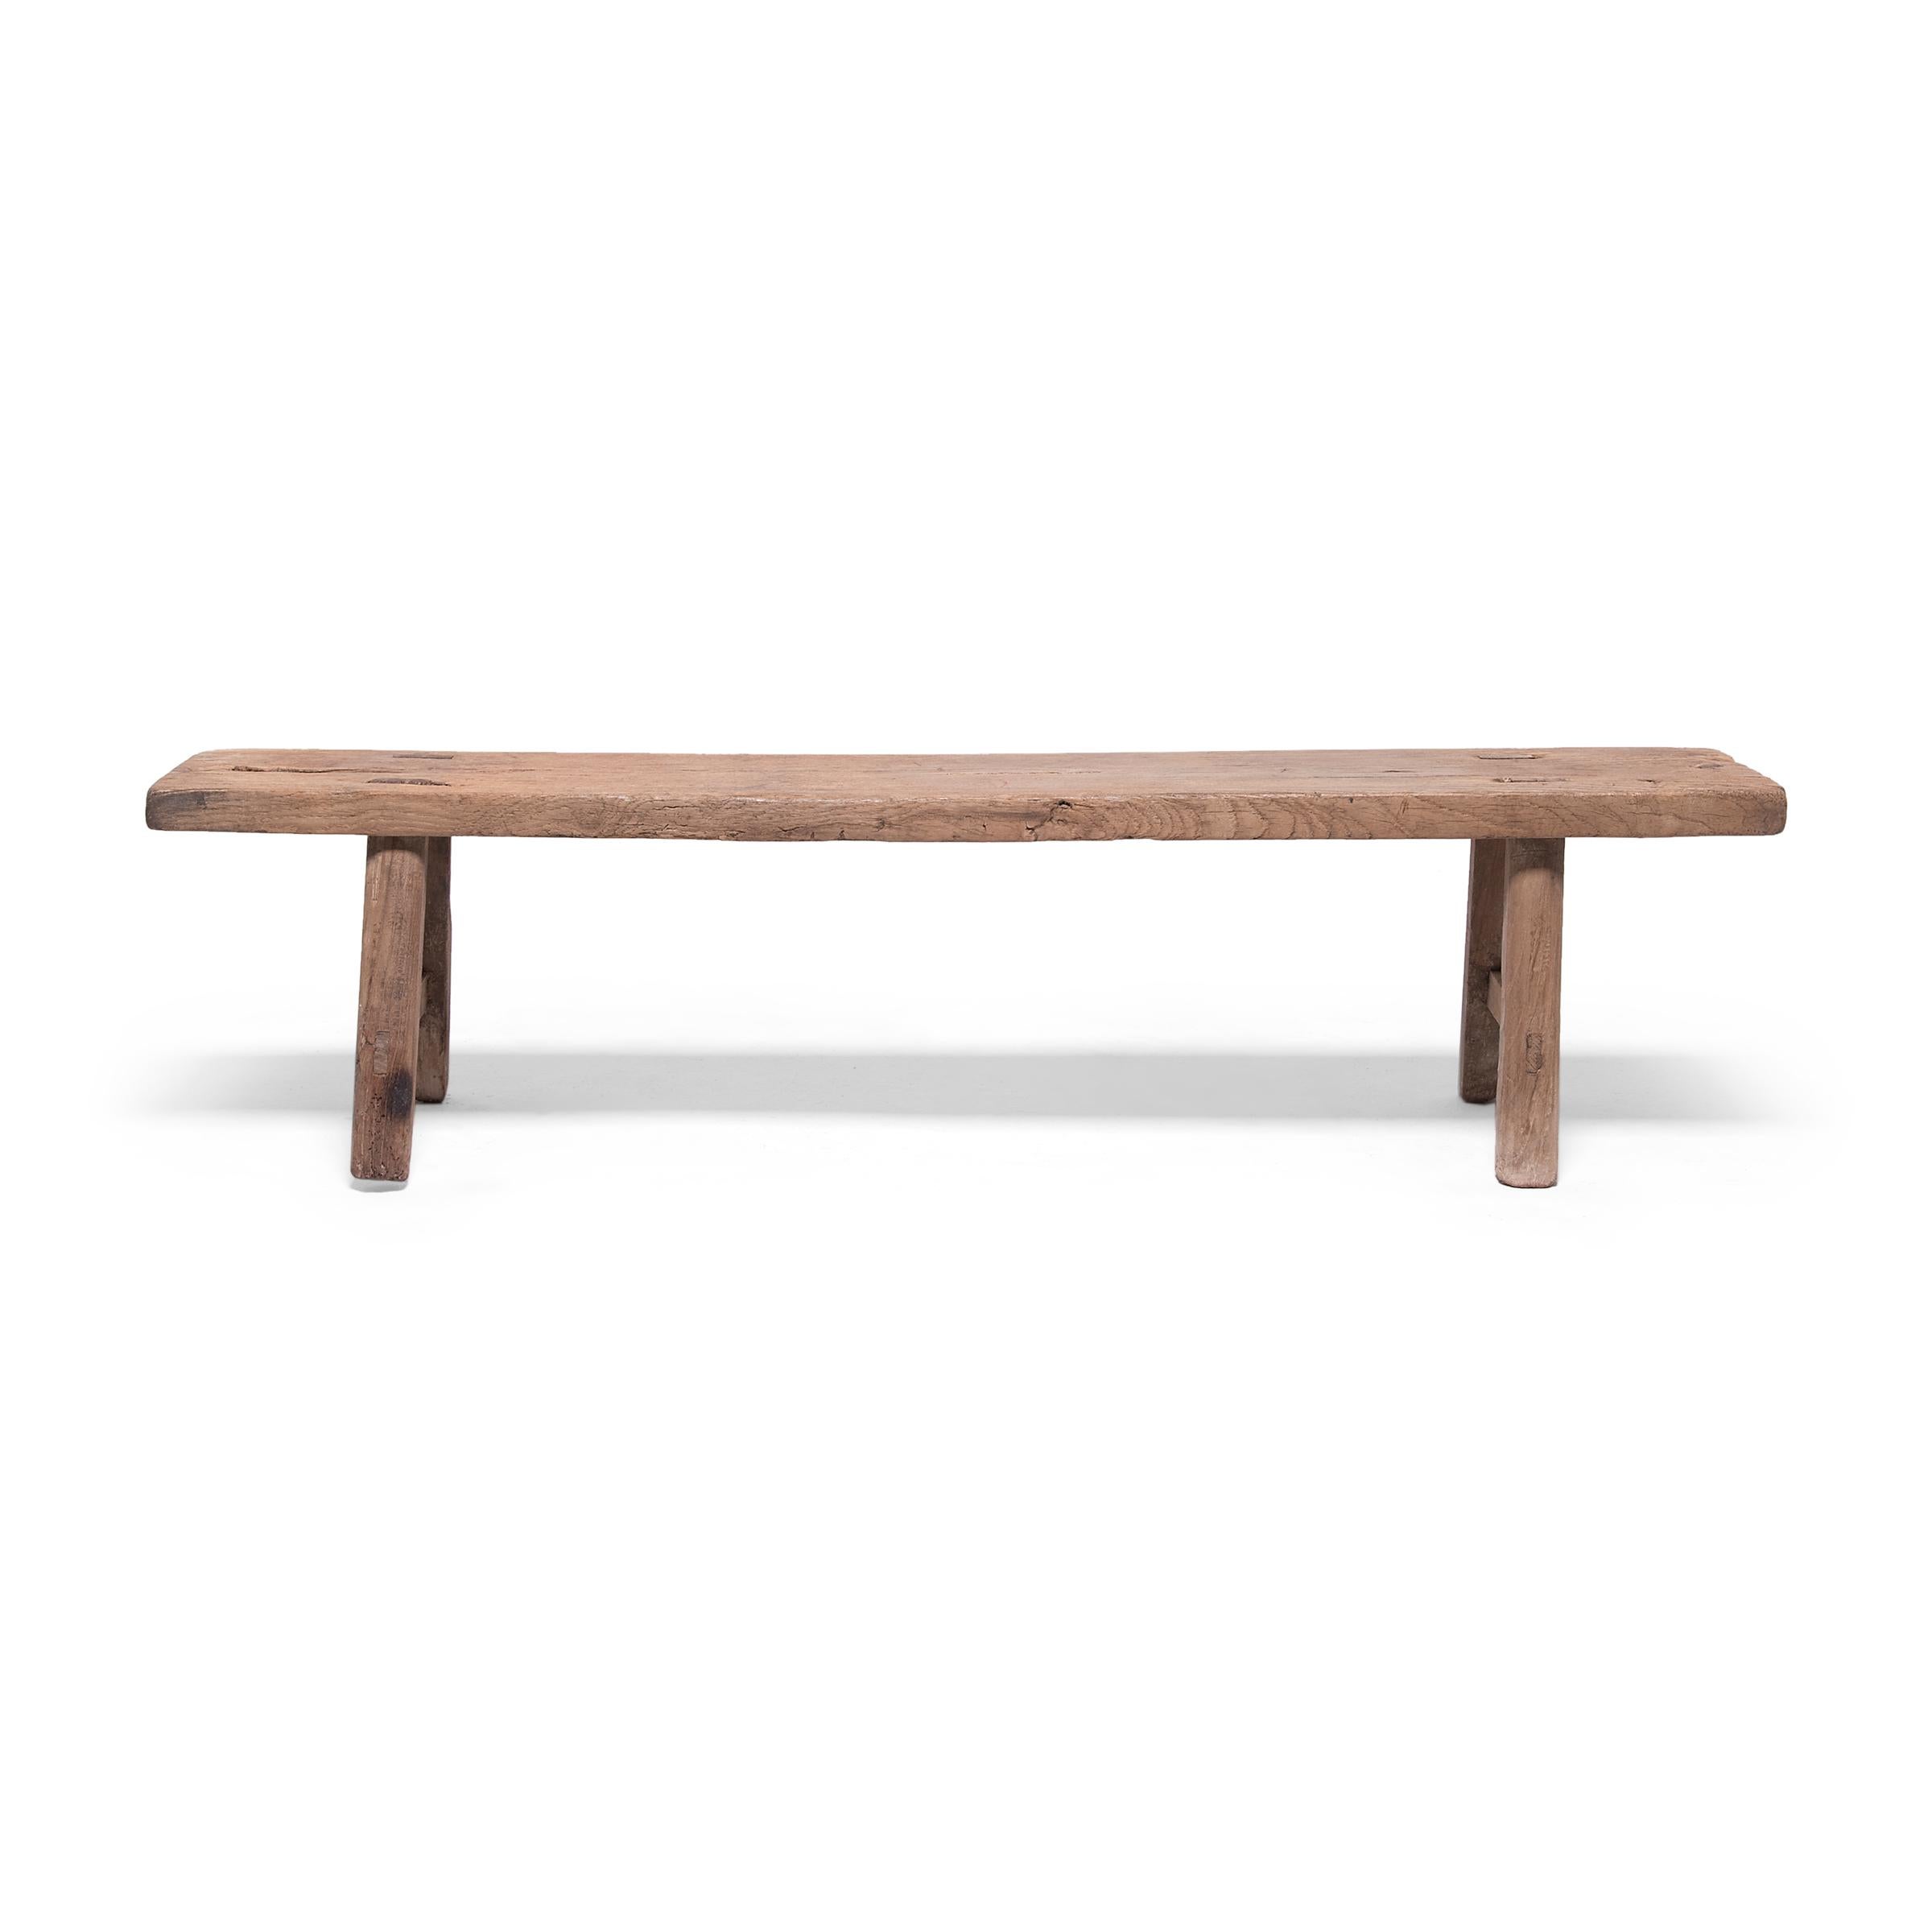 Embracing the raw beauty of unworked wood, this low bench from Hebei province is made from a single piece of unfinished elmwood timber. Dated to the late 19th century, the plank-top bench was crafted using mortise-and-tenon joinery techniques and